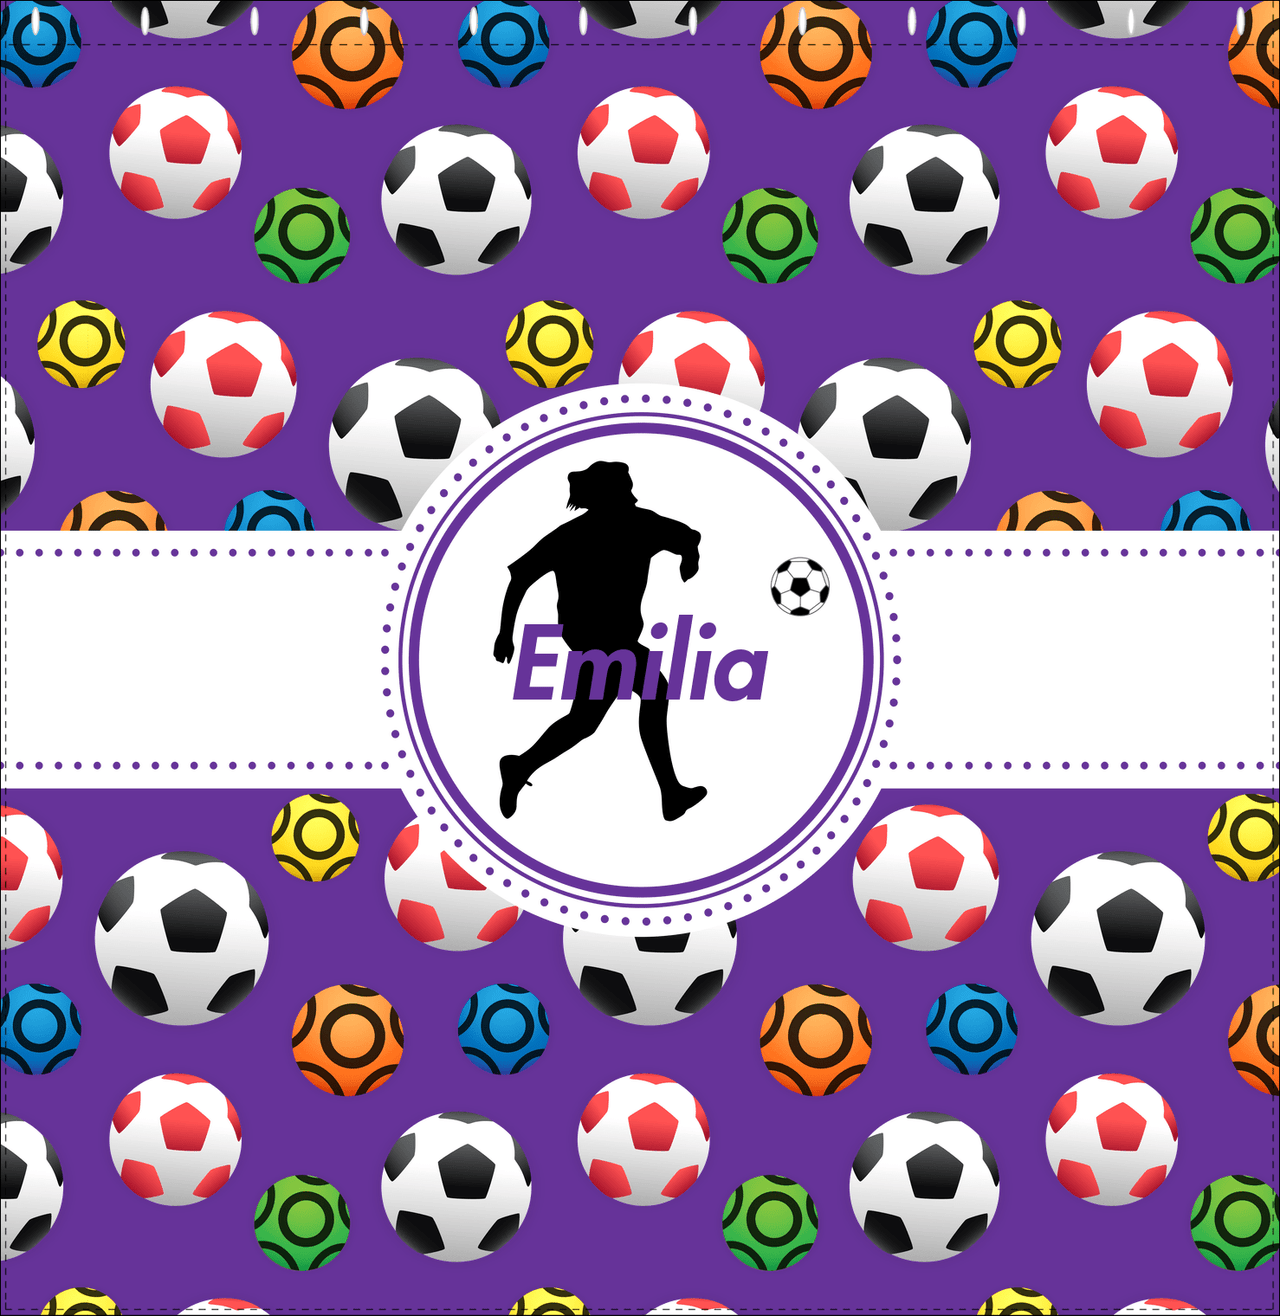 Personalized Soccer Shower Curtain XLVIII - Purple Background - Girl Silhouette III - Decorate View